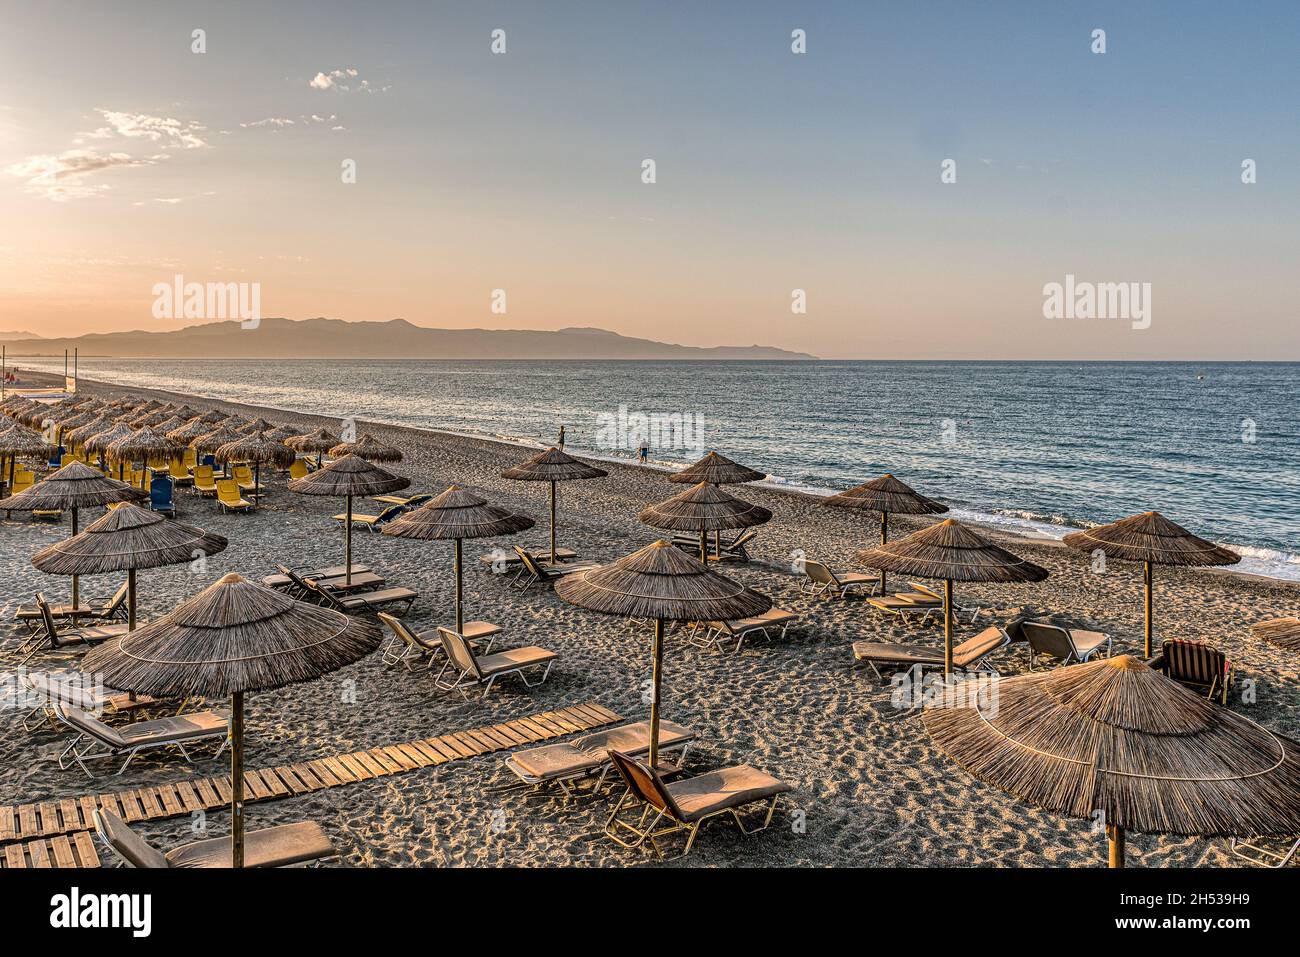 no tourists on a beach with sunbeds and umbrellas, Crete, Greece, October 11, 2021 Stock Photo